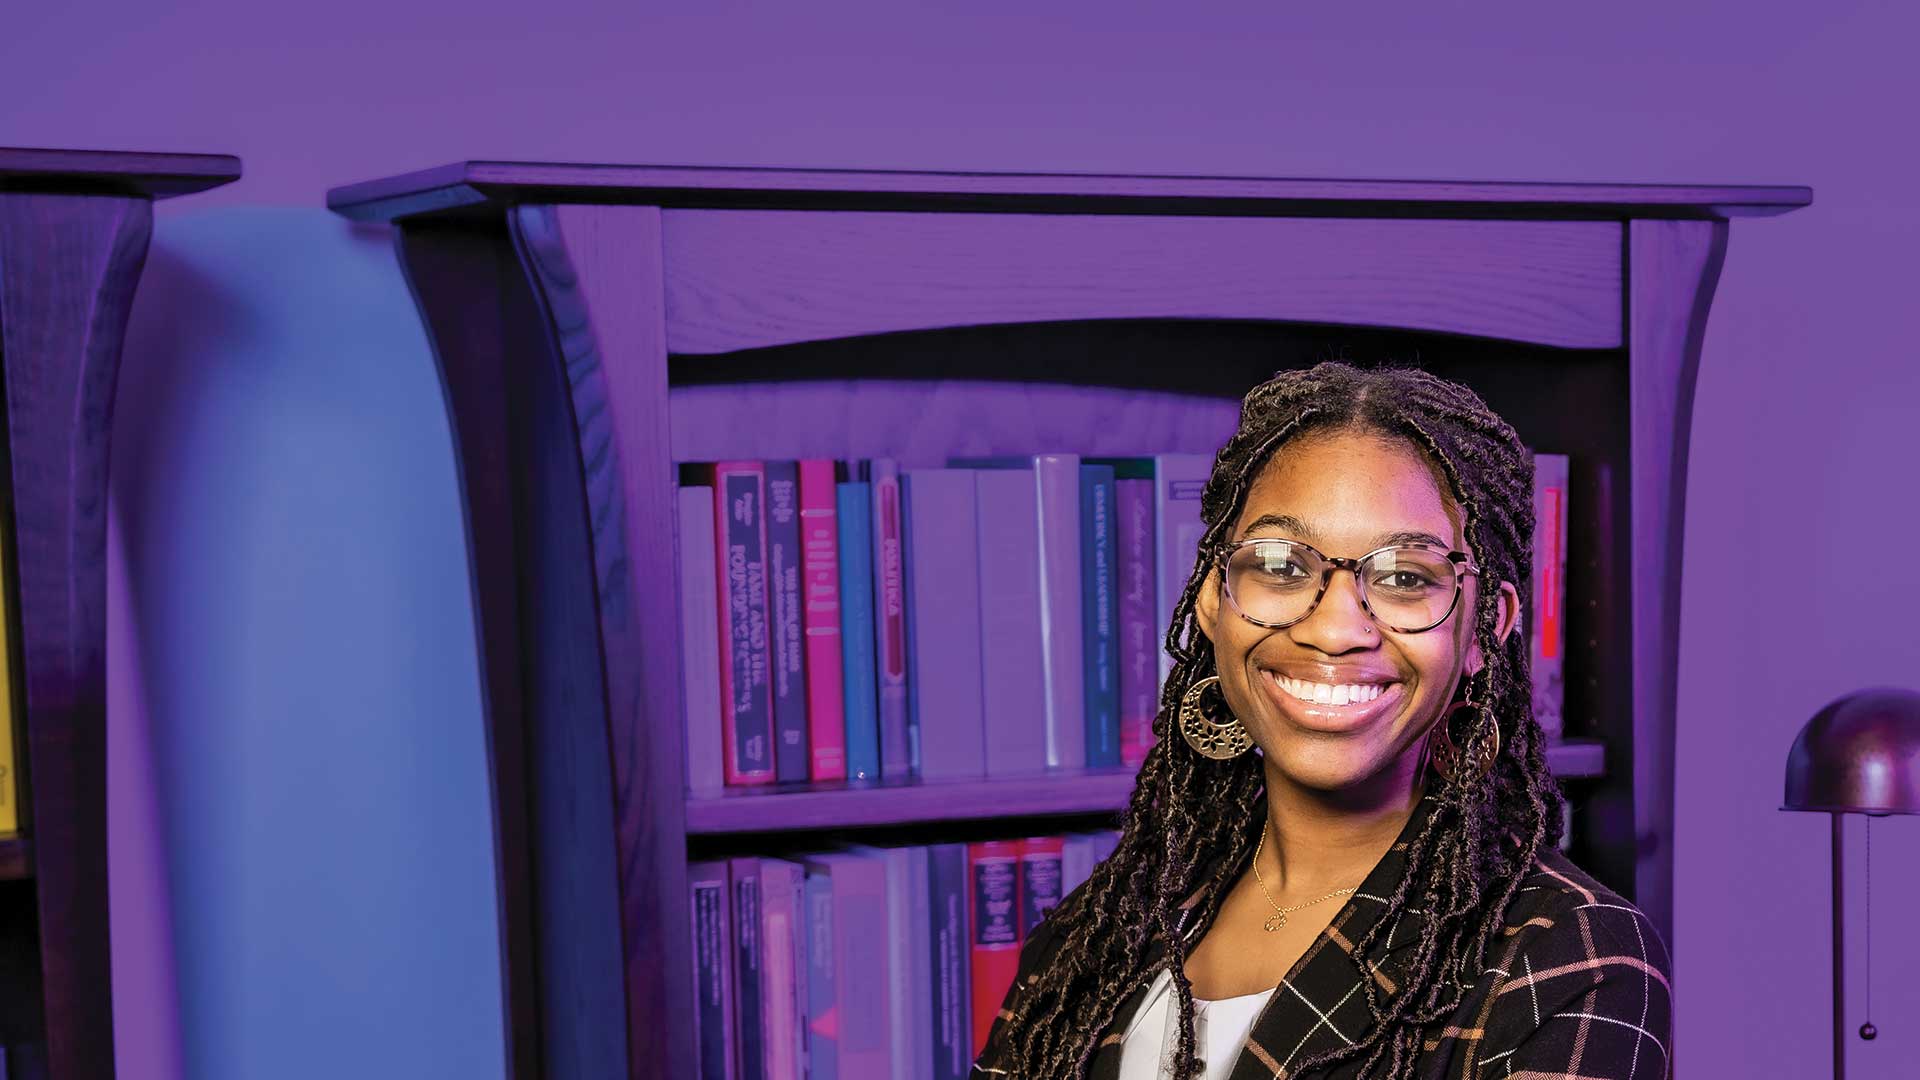 Houghton student Alexia Patterson standing in front of bookshelf wearing plaid blazer and glasses.